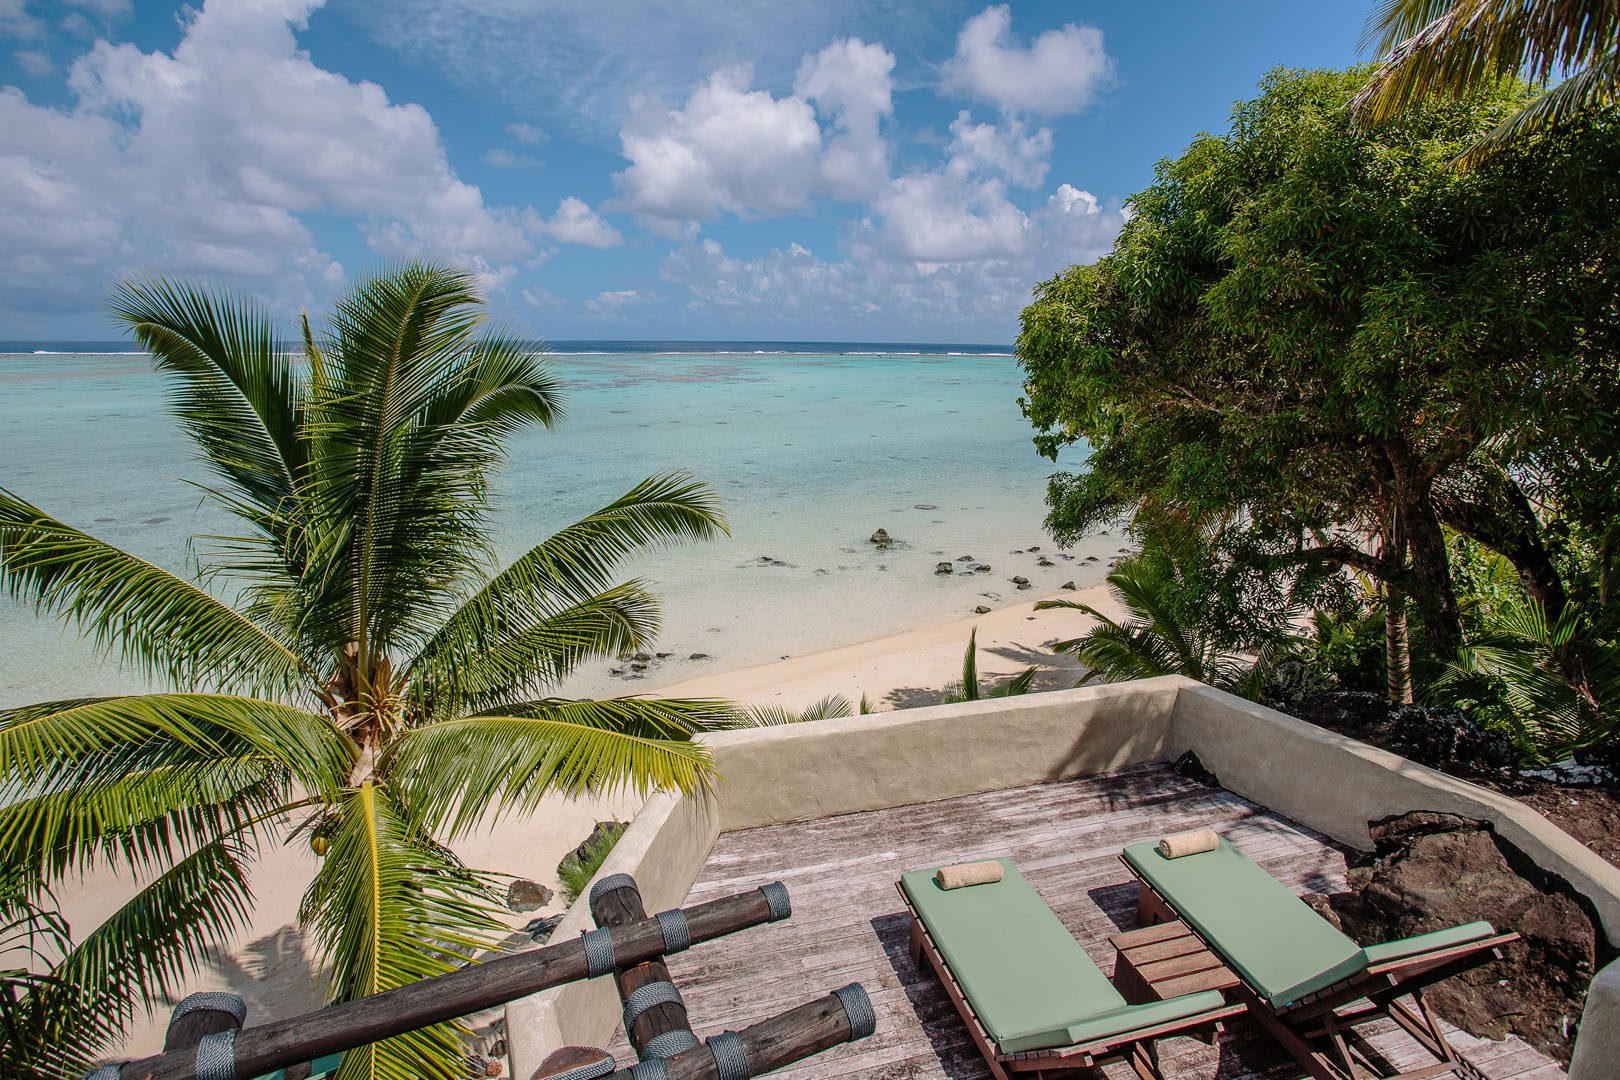 View of the large Ultimate Beachfront Villa Deck area with loungers perfectly set up to face the stunning lagoon view